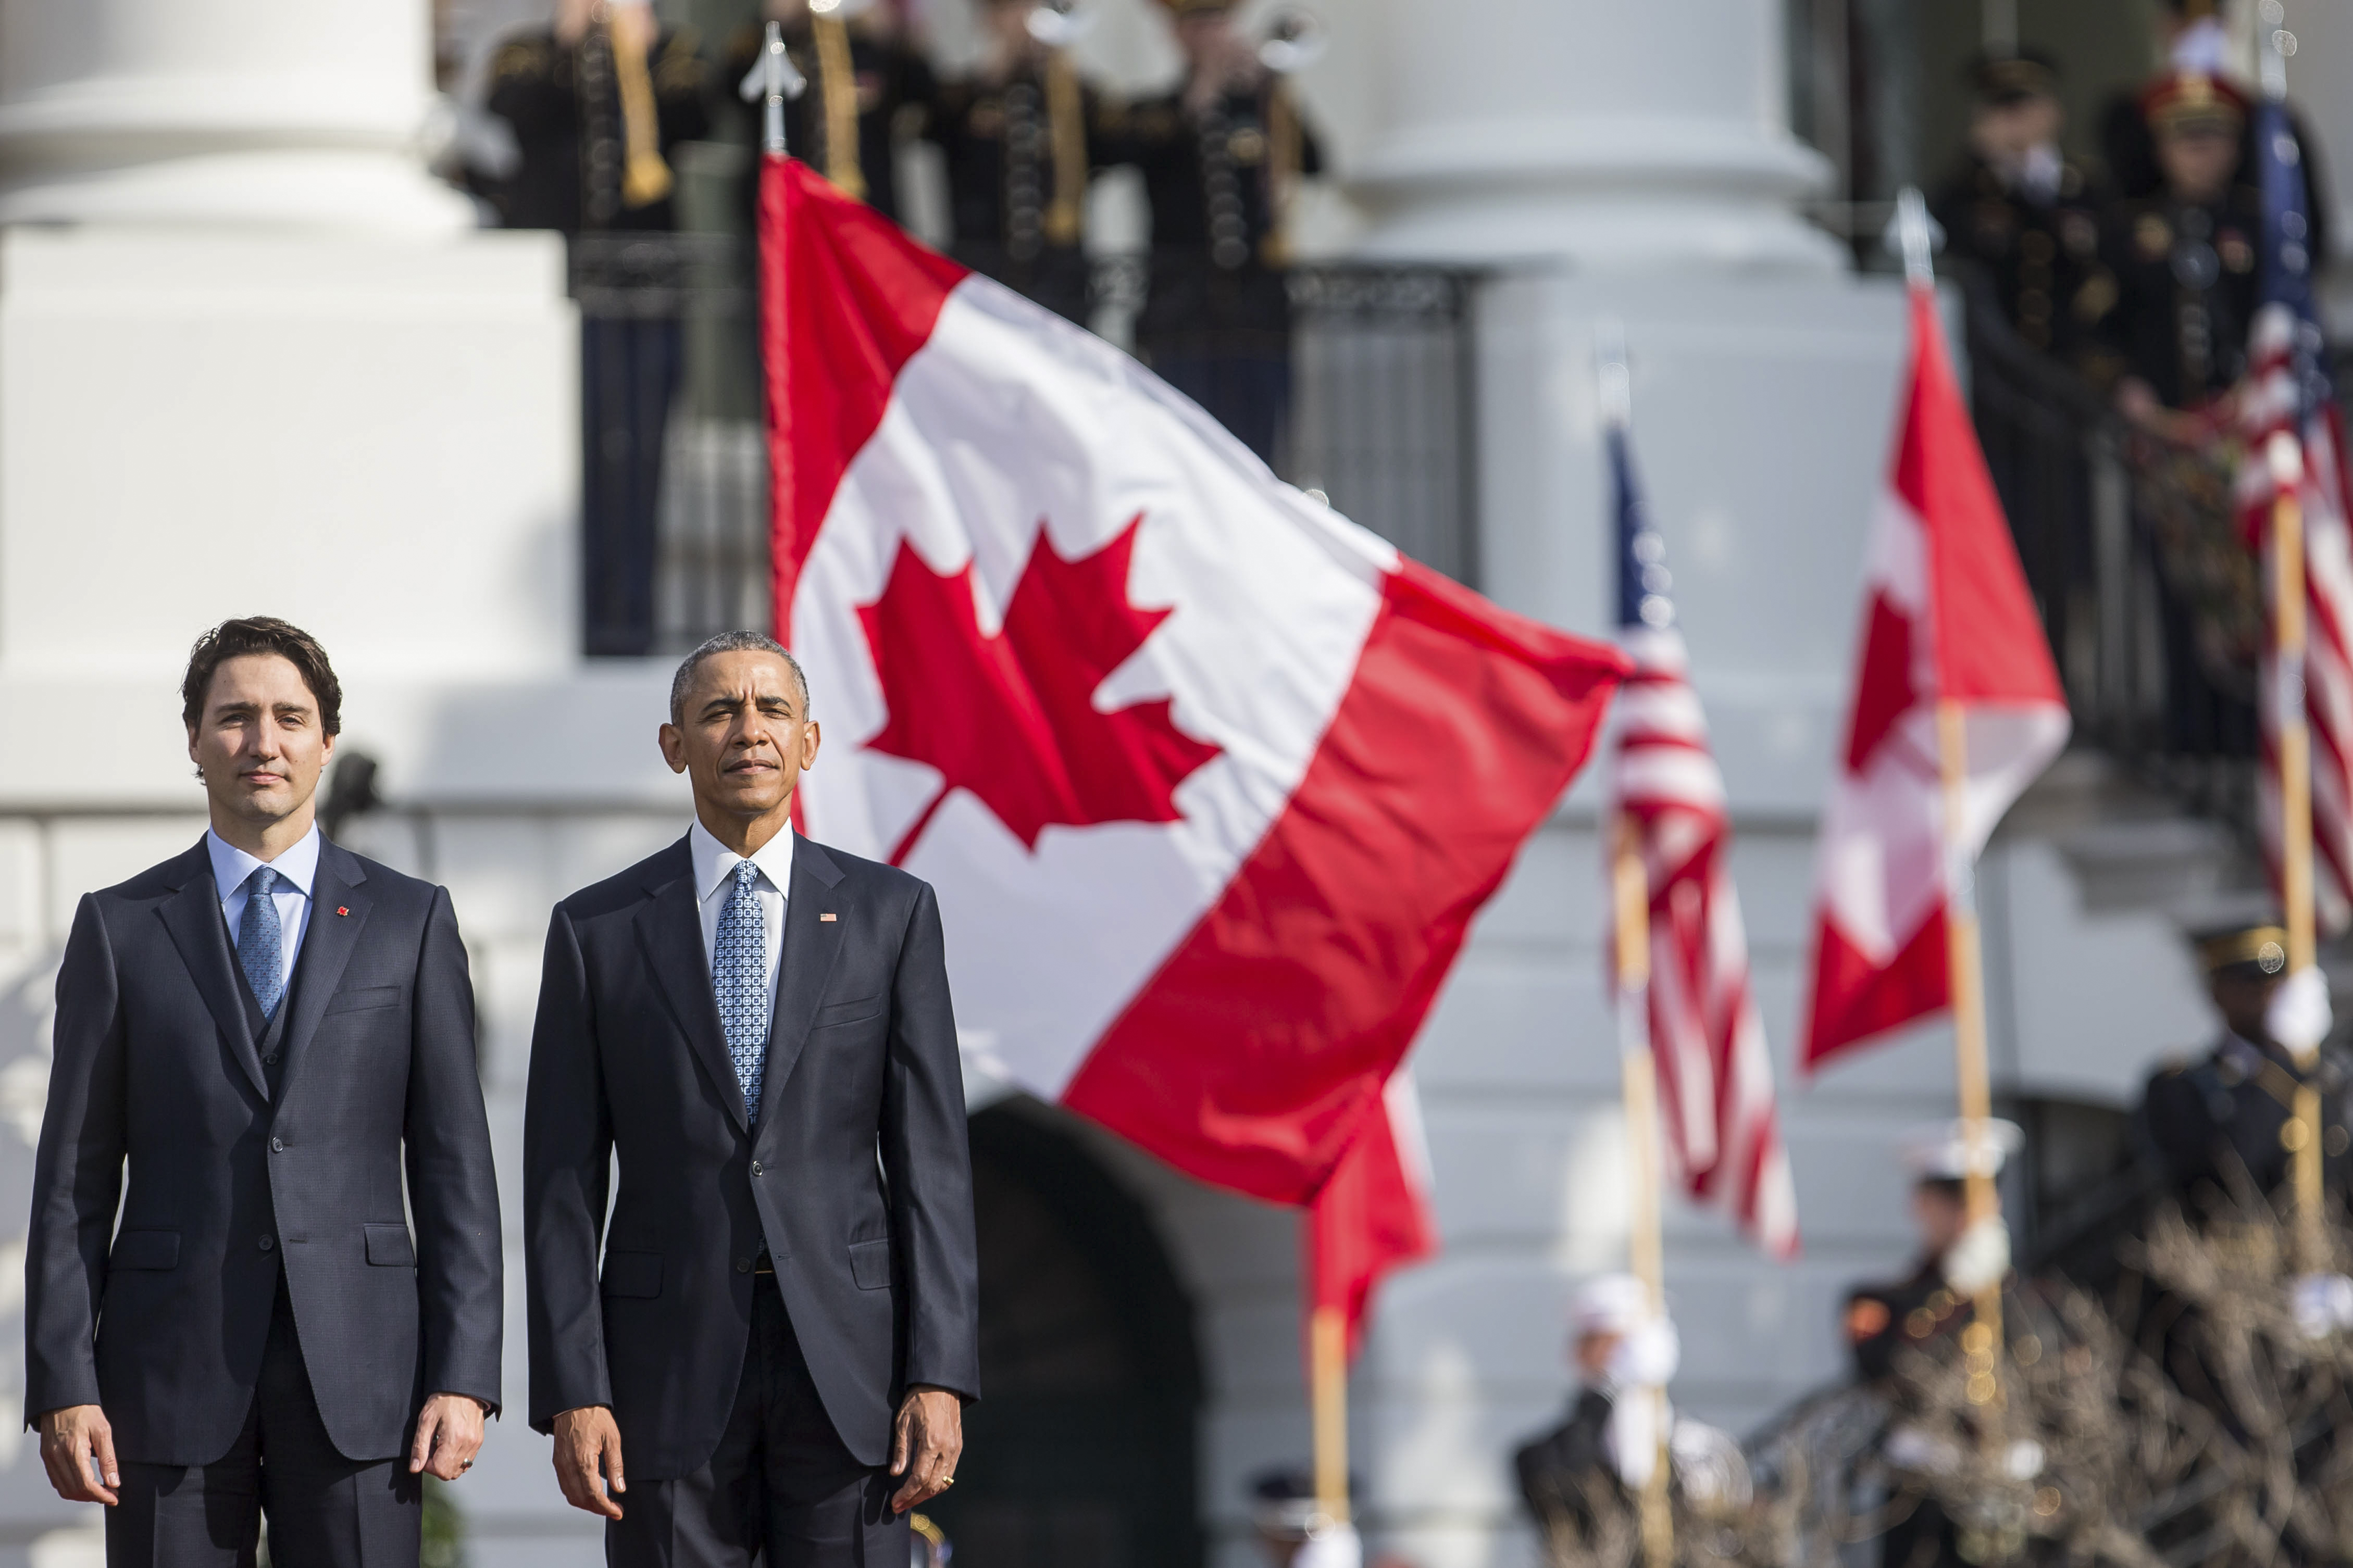 FILE -- President Barack Obama and Canadian Prime Minister Justin Trudeau during a state arrival ceremony on the South Lawn of the White House, in Washington, March 10, 2015. Garden Collective, a creative agency in Toronto, spurred a viral social media campaign, calling on Canadians to give pep talks to their friends across the border, assuring them that America is great. (Zach Gibson/The New York Times)